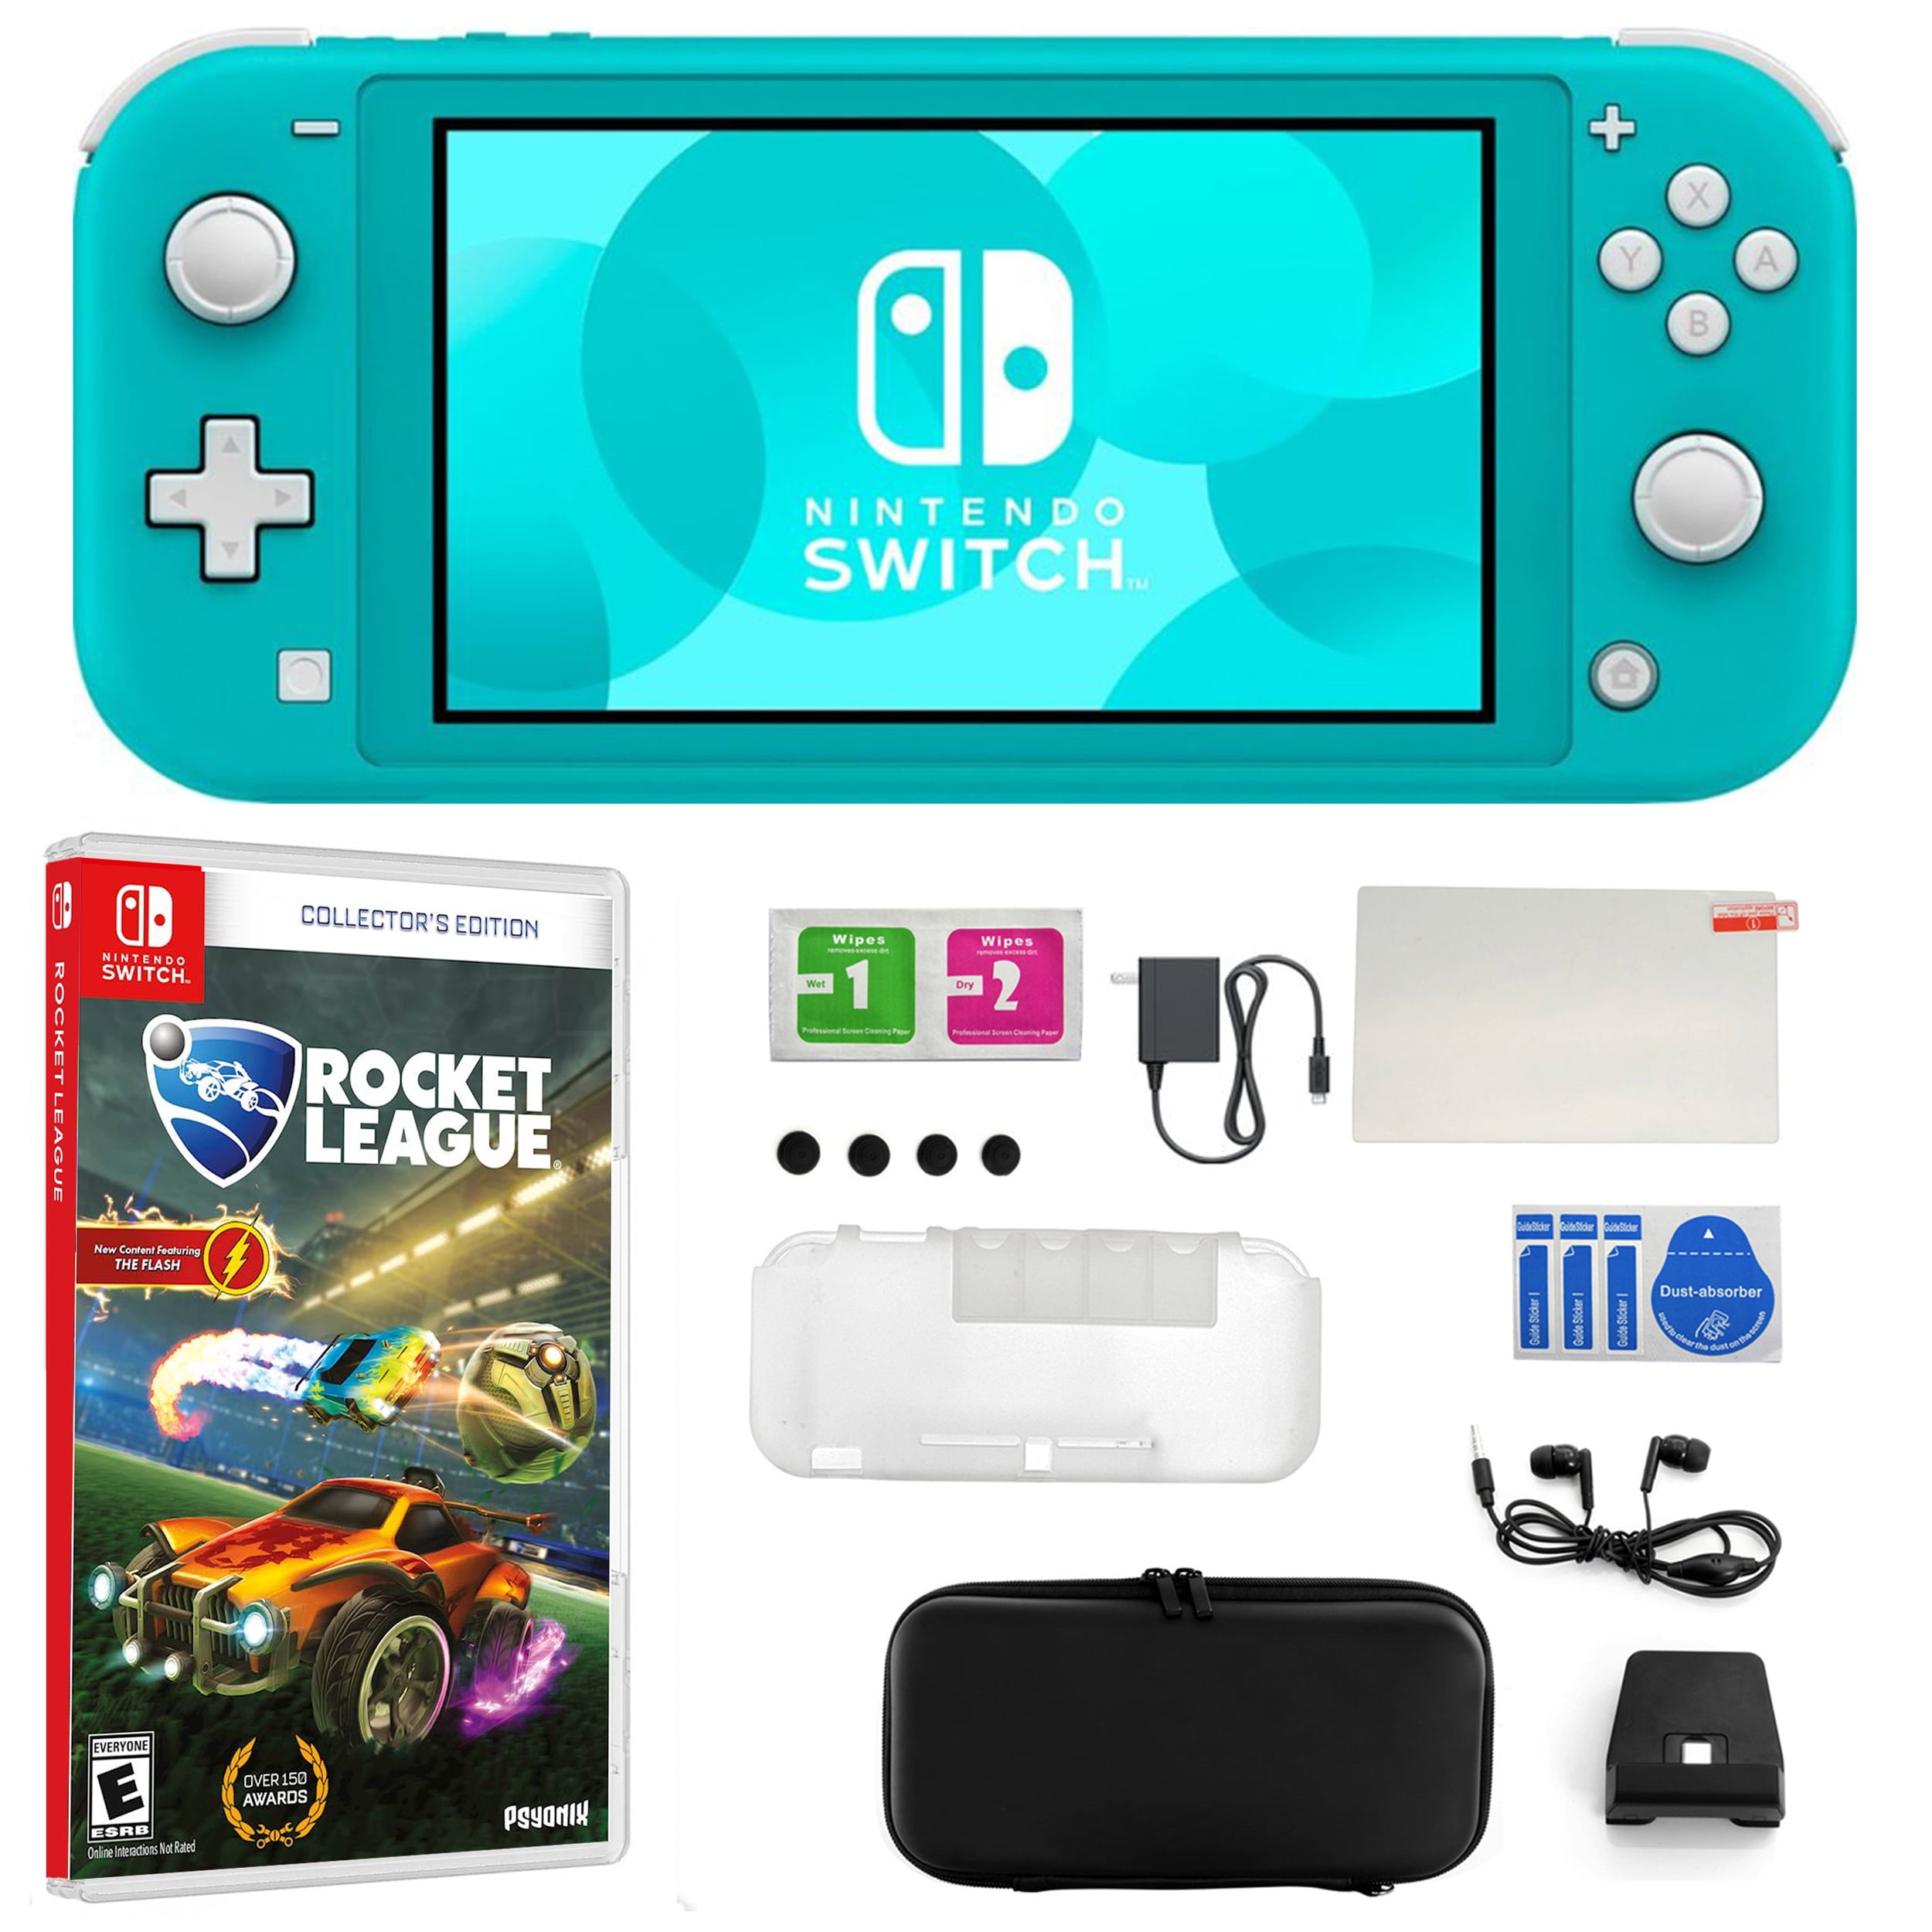 Nintendo Switch Lite in Turquoise with Rocket League and